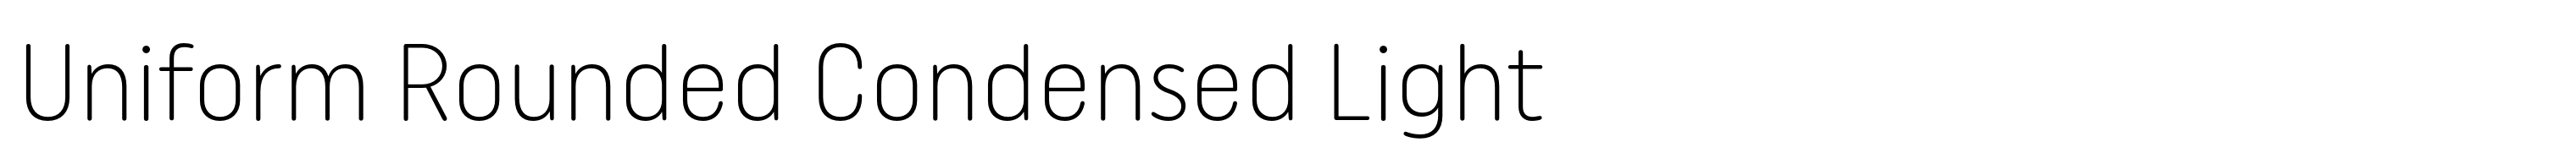 Uniform Rounded Condensed Light